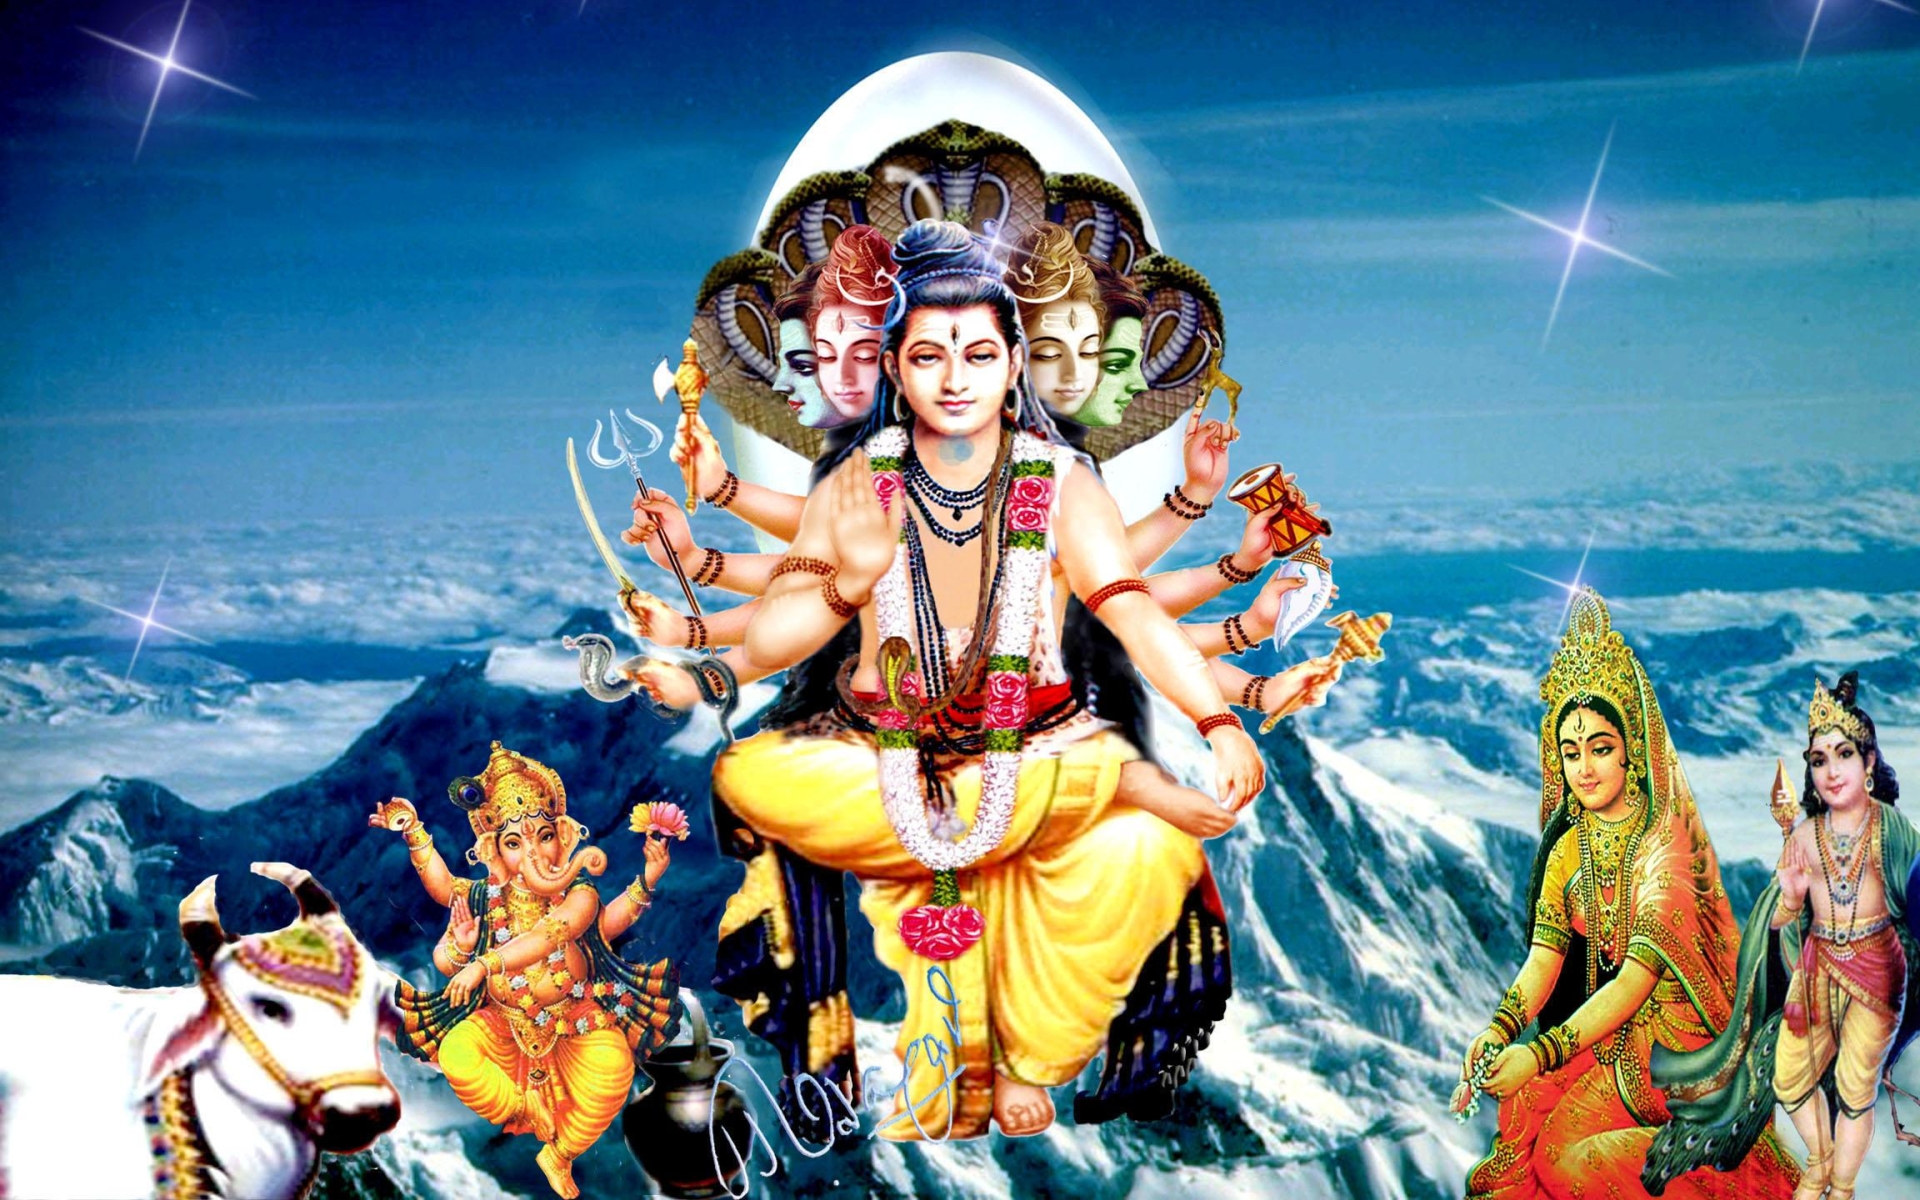 3D Wallpaper Designs 3D Wallpapers Of Lord Shiva 1920x1200